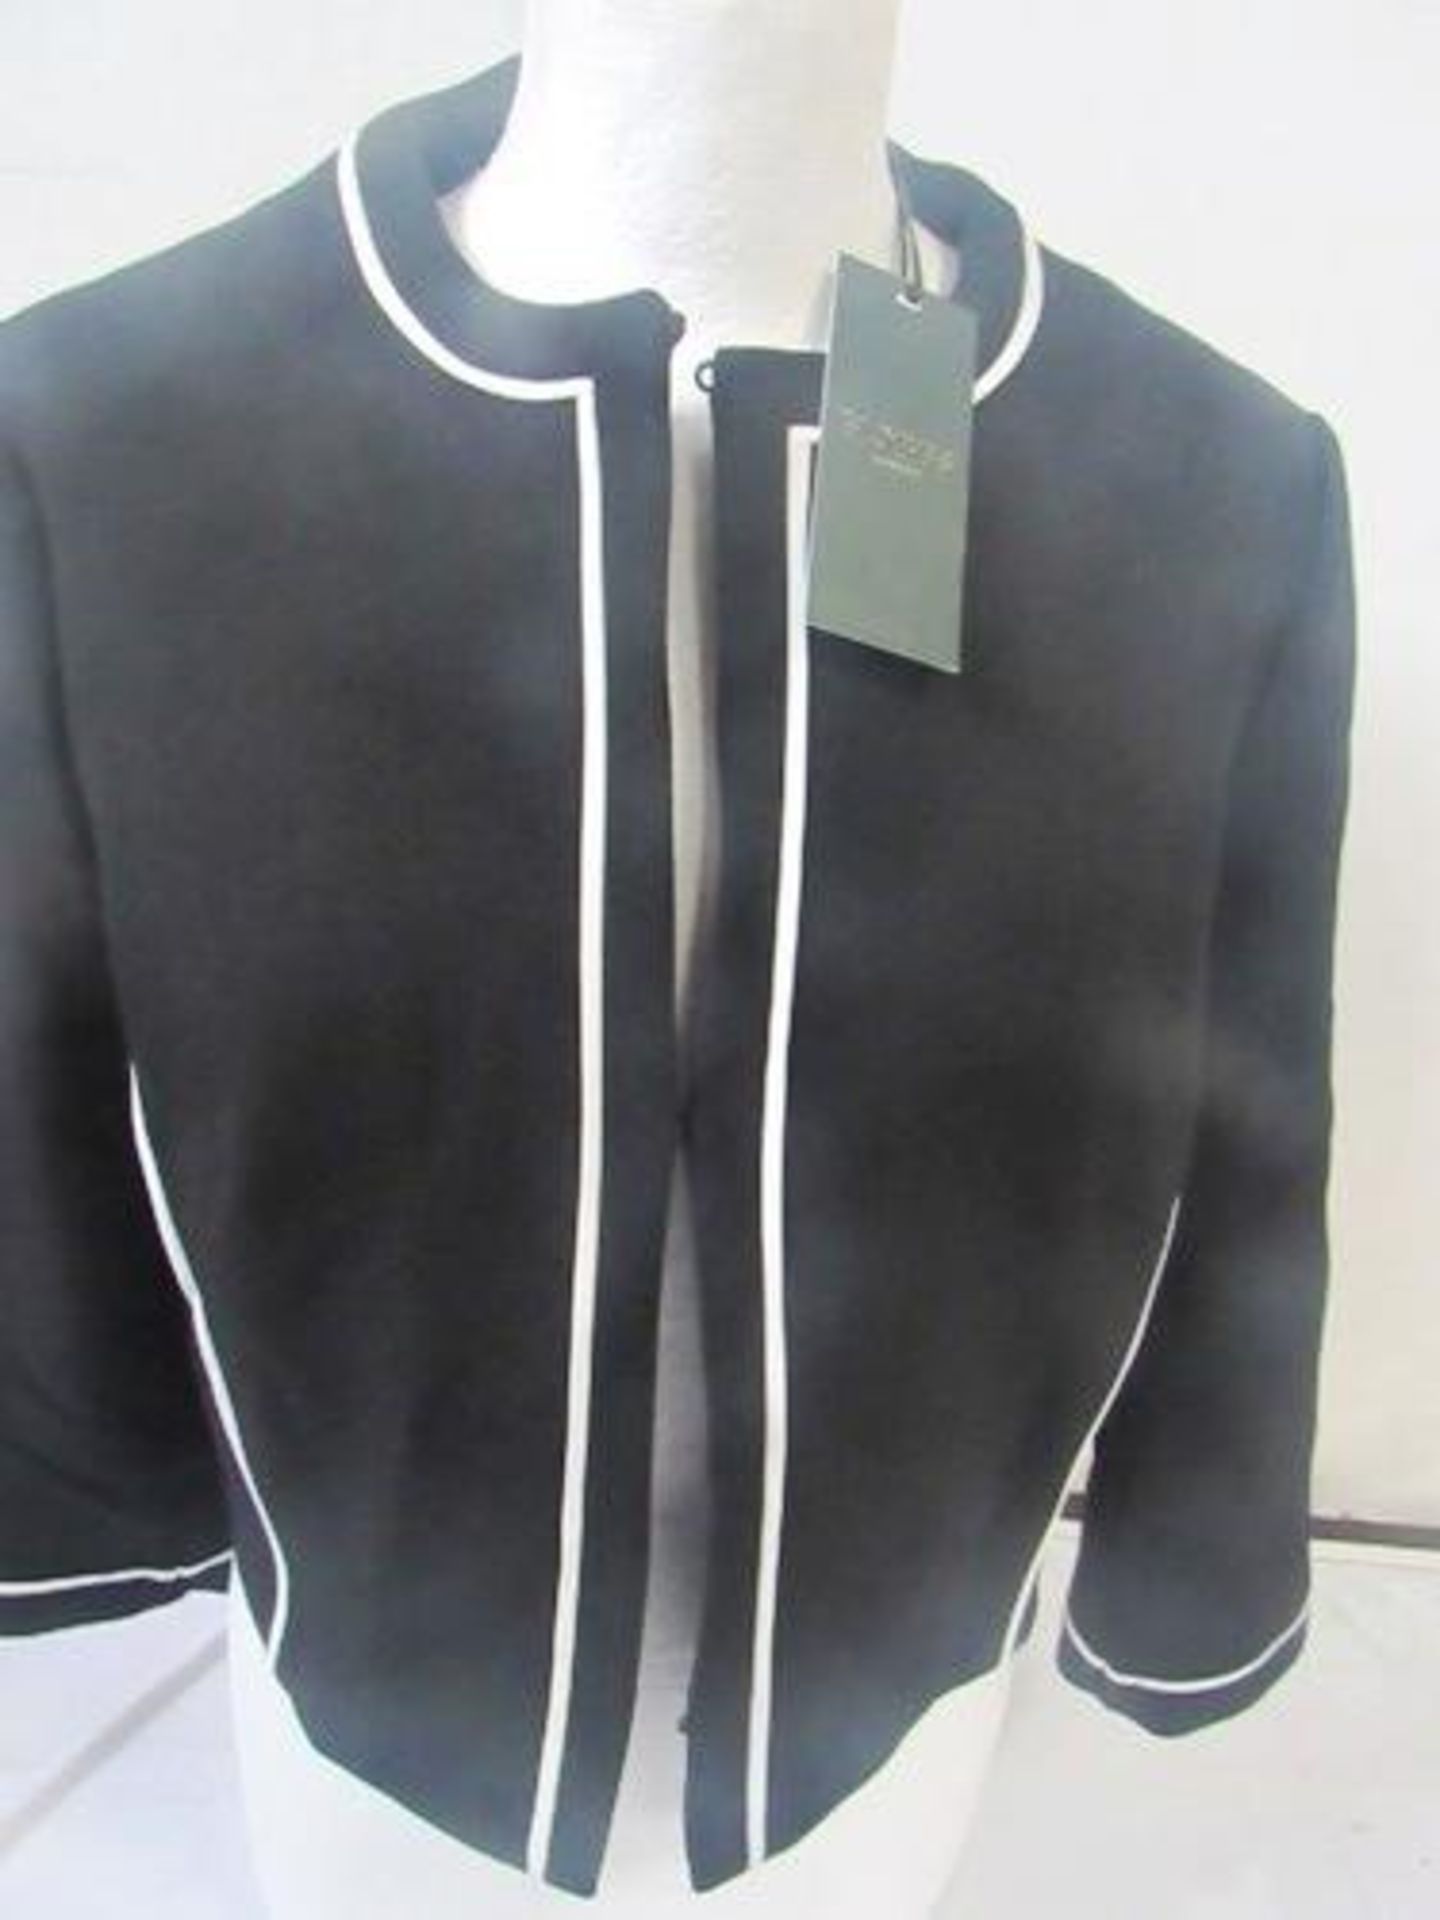 1 x Hobbs Cordelia jackets, size 12 - New with tags (ES16C)